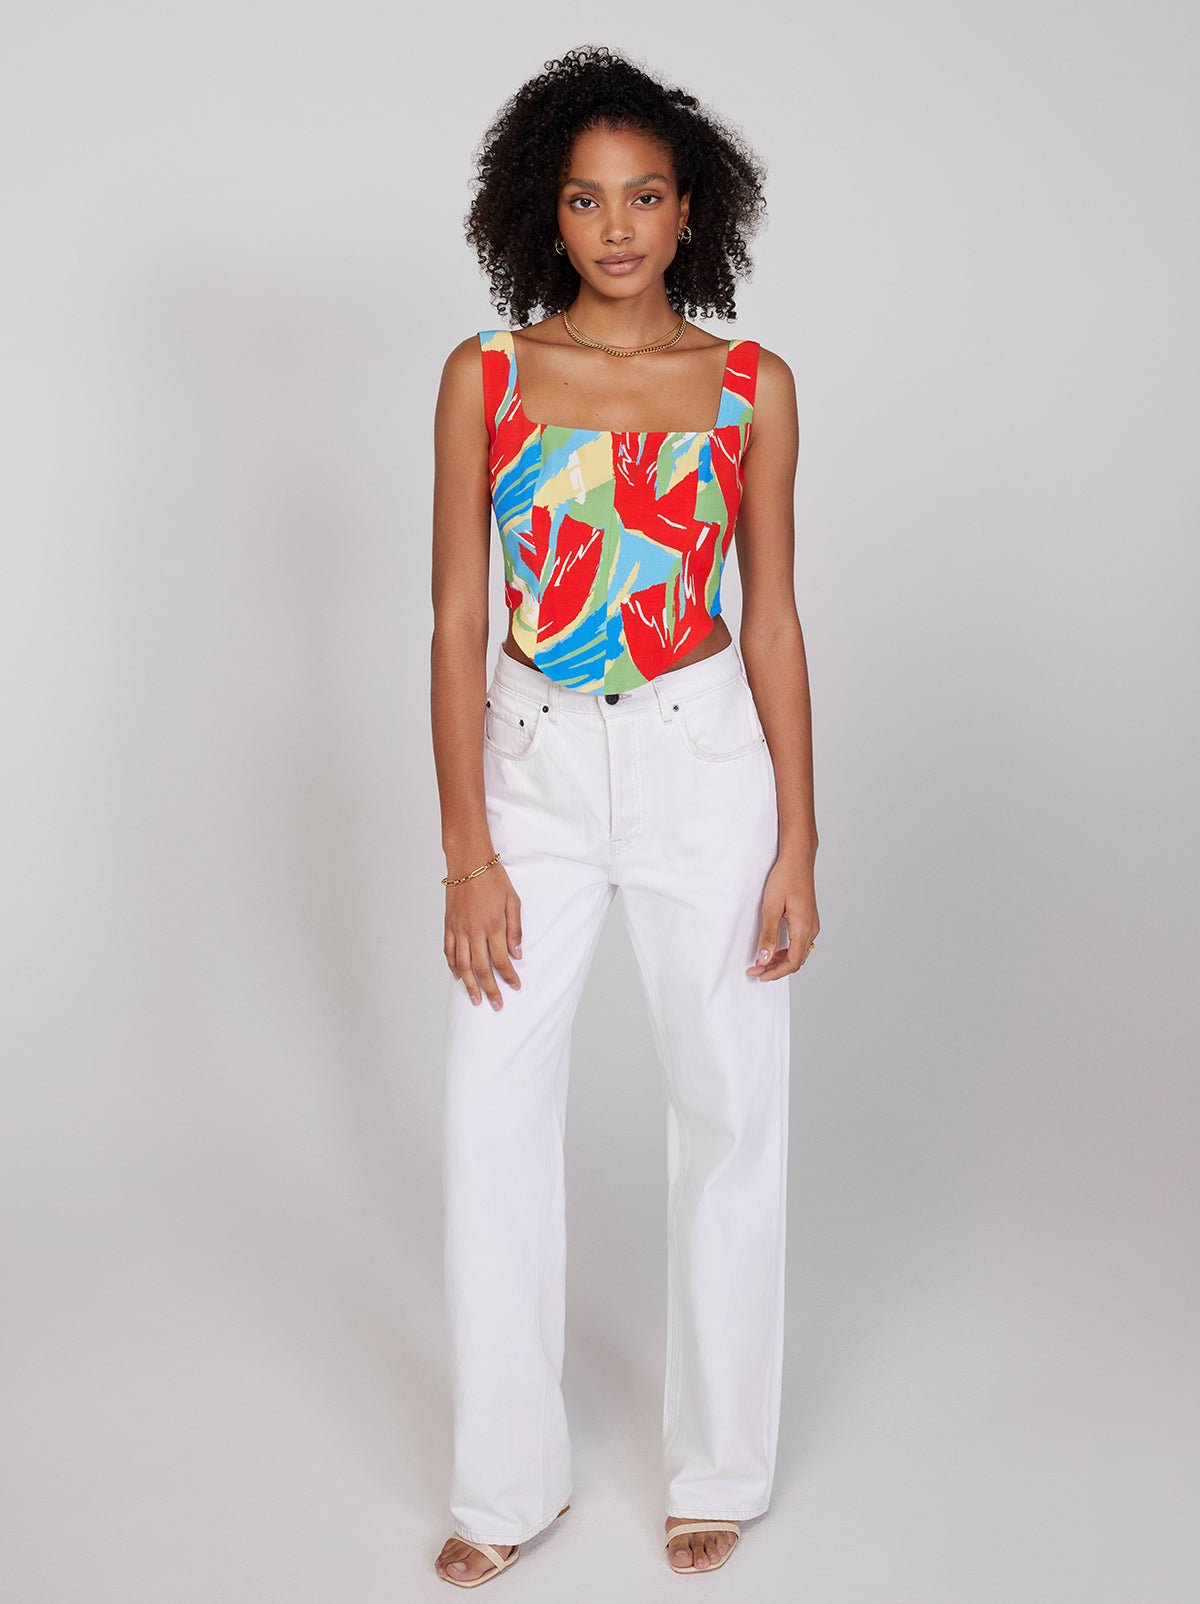 Ines Abstract Print Top By KITRI Studio